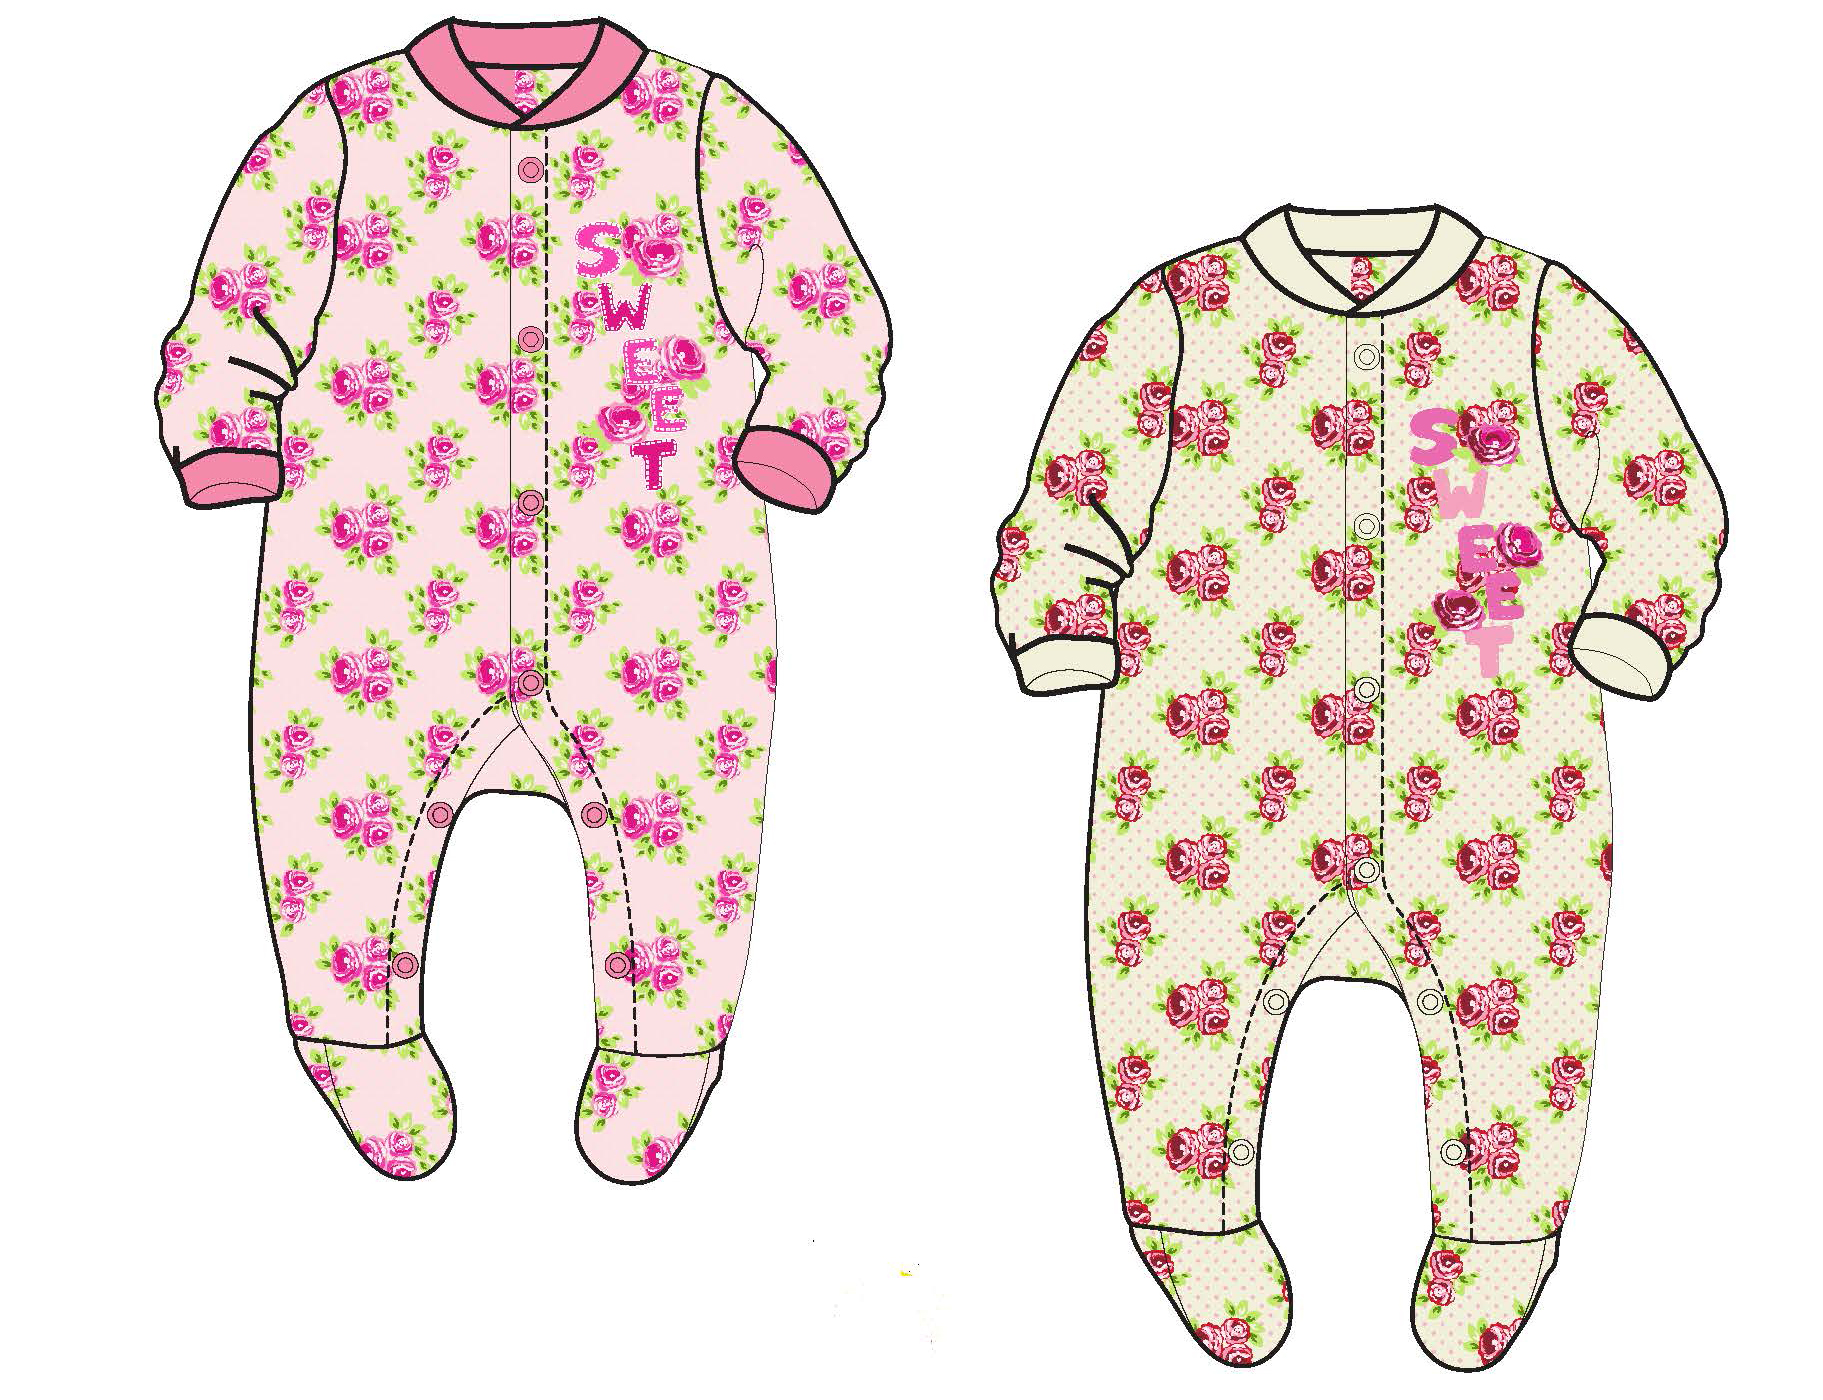 Baby Girl's Knit One-Piece Footed PAJAMAS w/ Embroidered Sweet & Rose Floral Print - Newborn Size